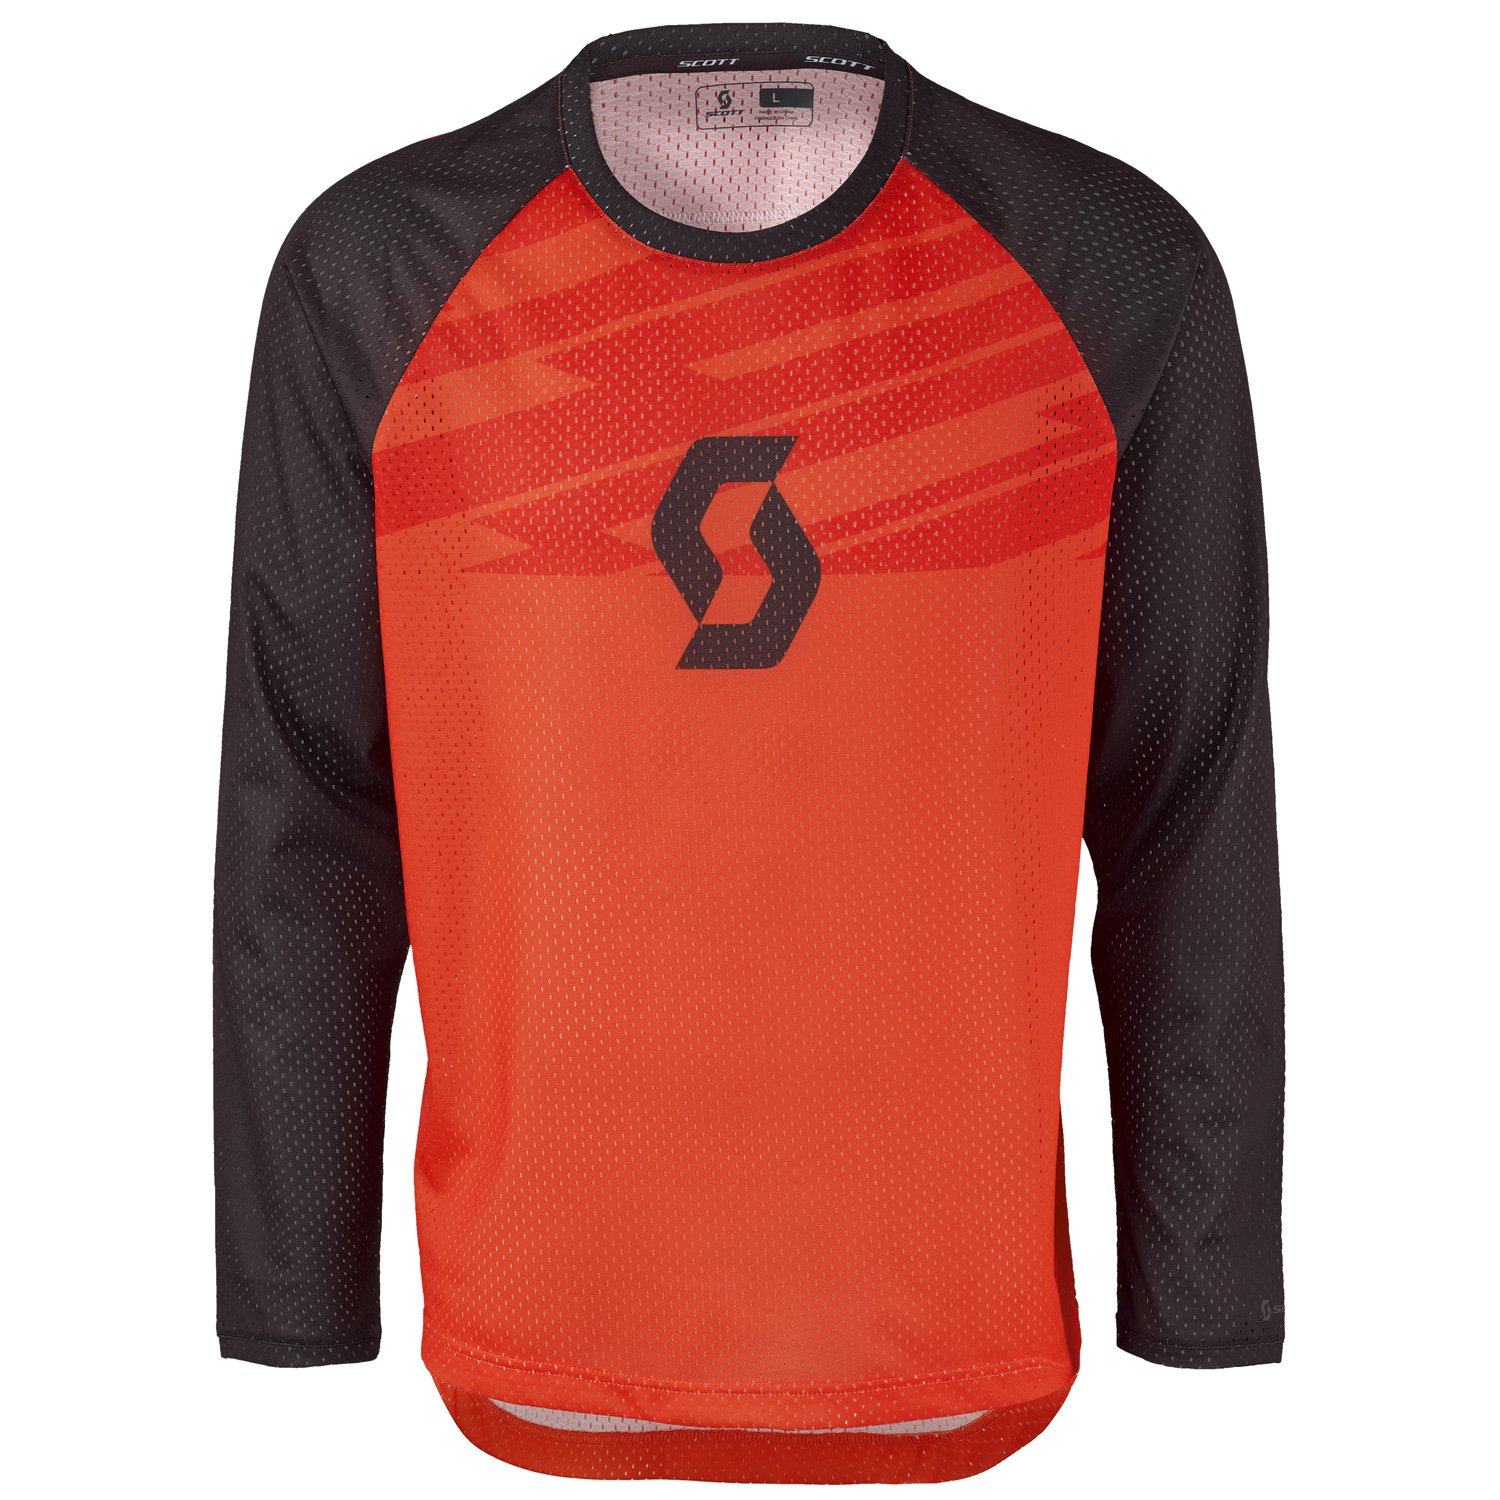 Scott Maillot VTT Manches Longues Trail DH Tangerine Orange/Fiery Red